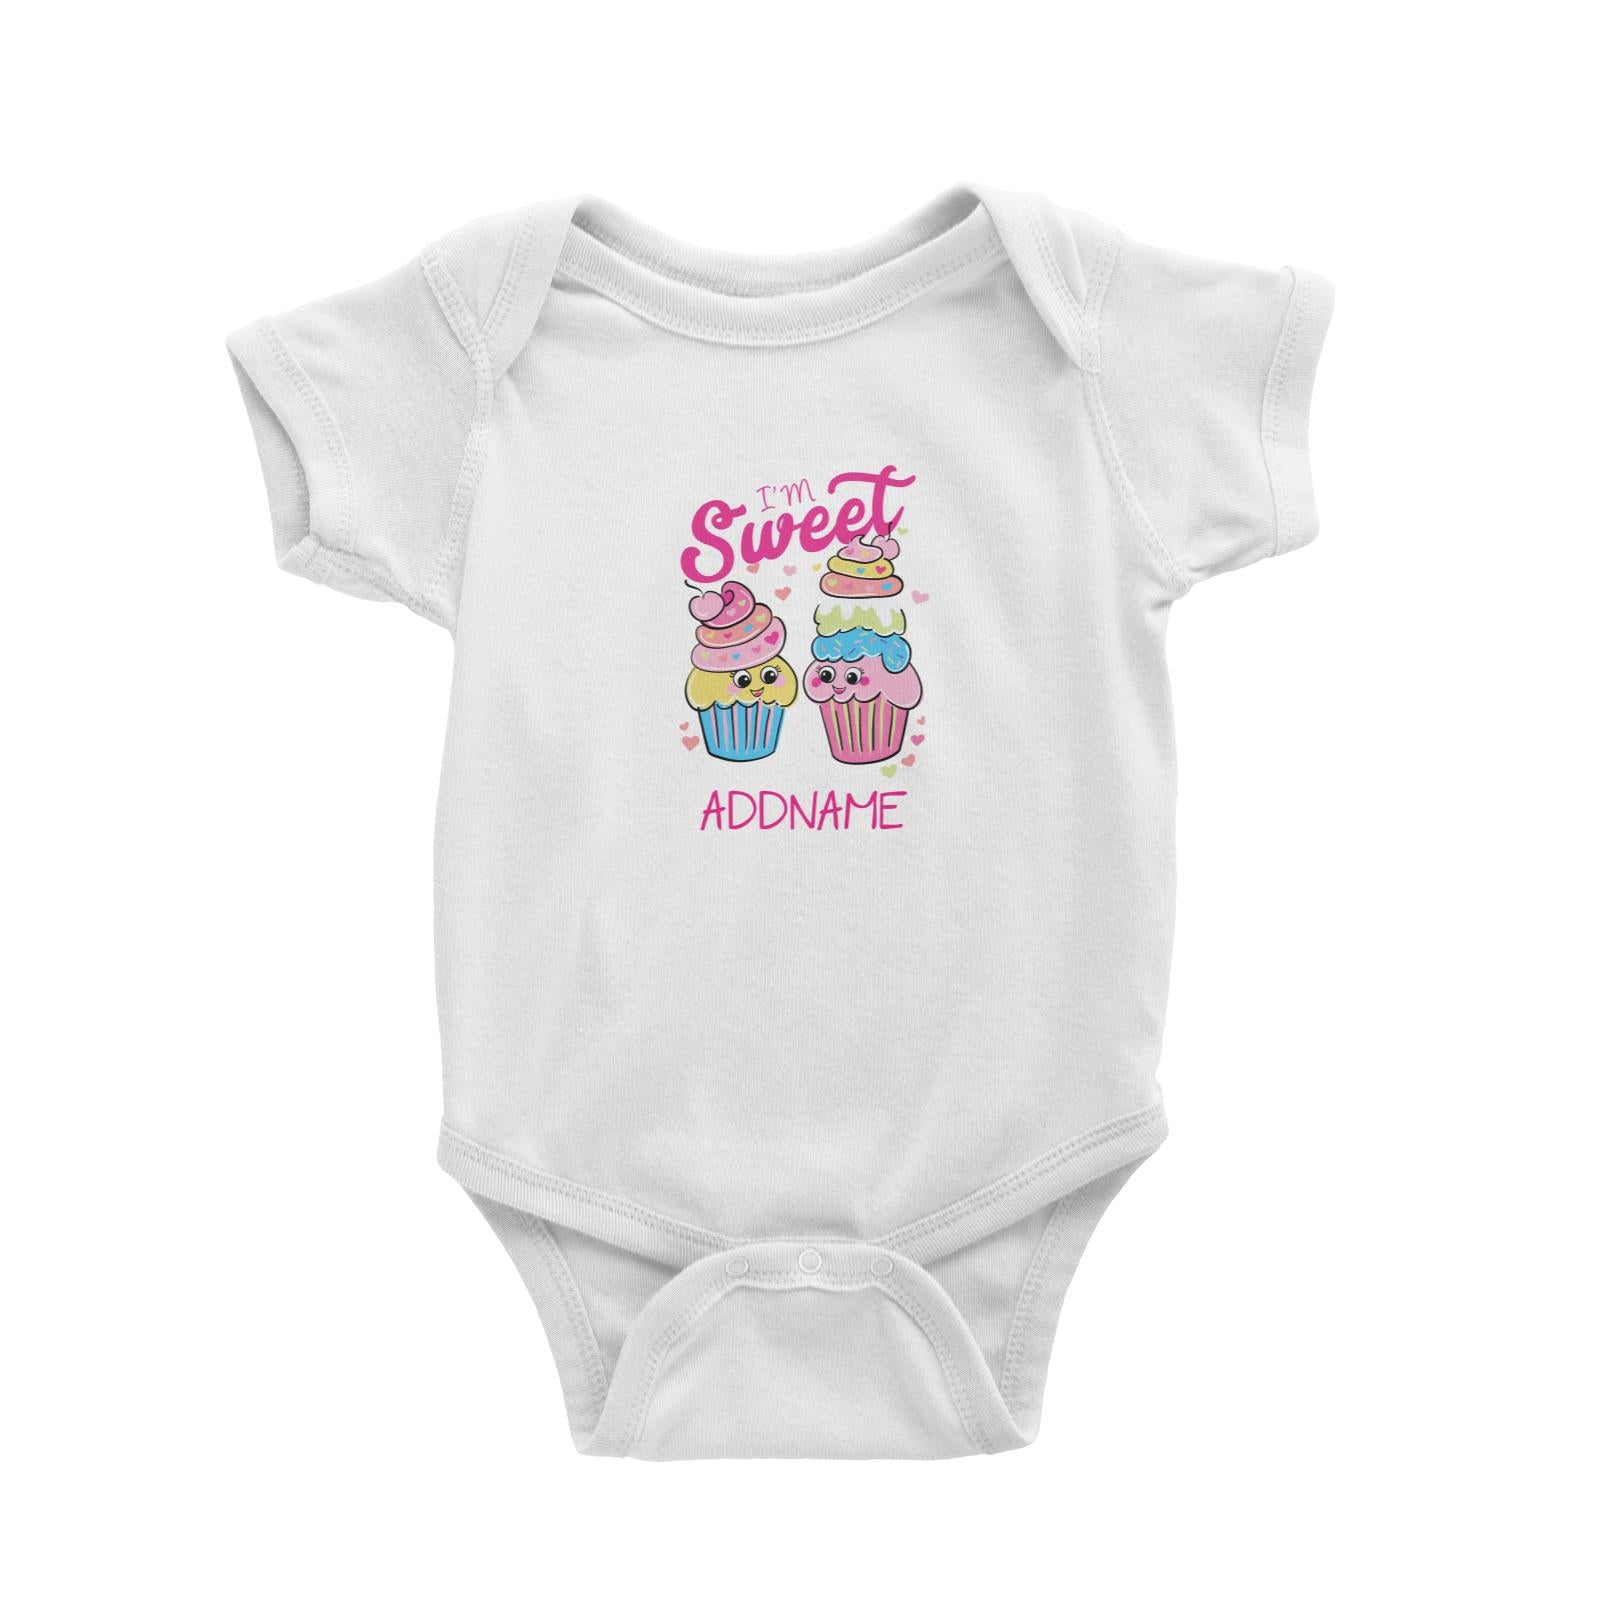 Cool Vibrant Series I'm Sweet Cupcakes Addname Baby Romper [SALE]